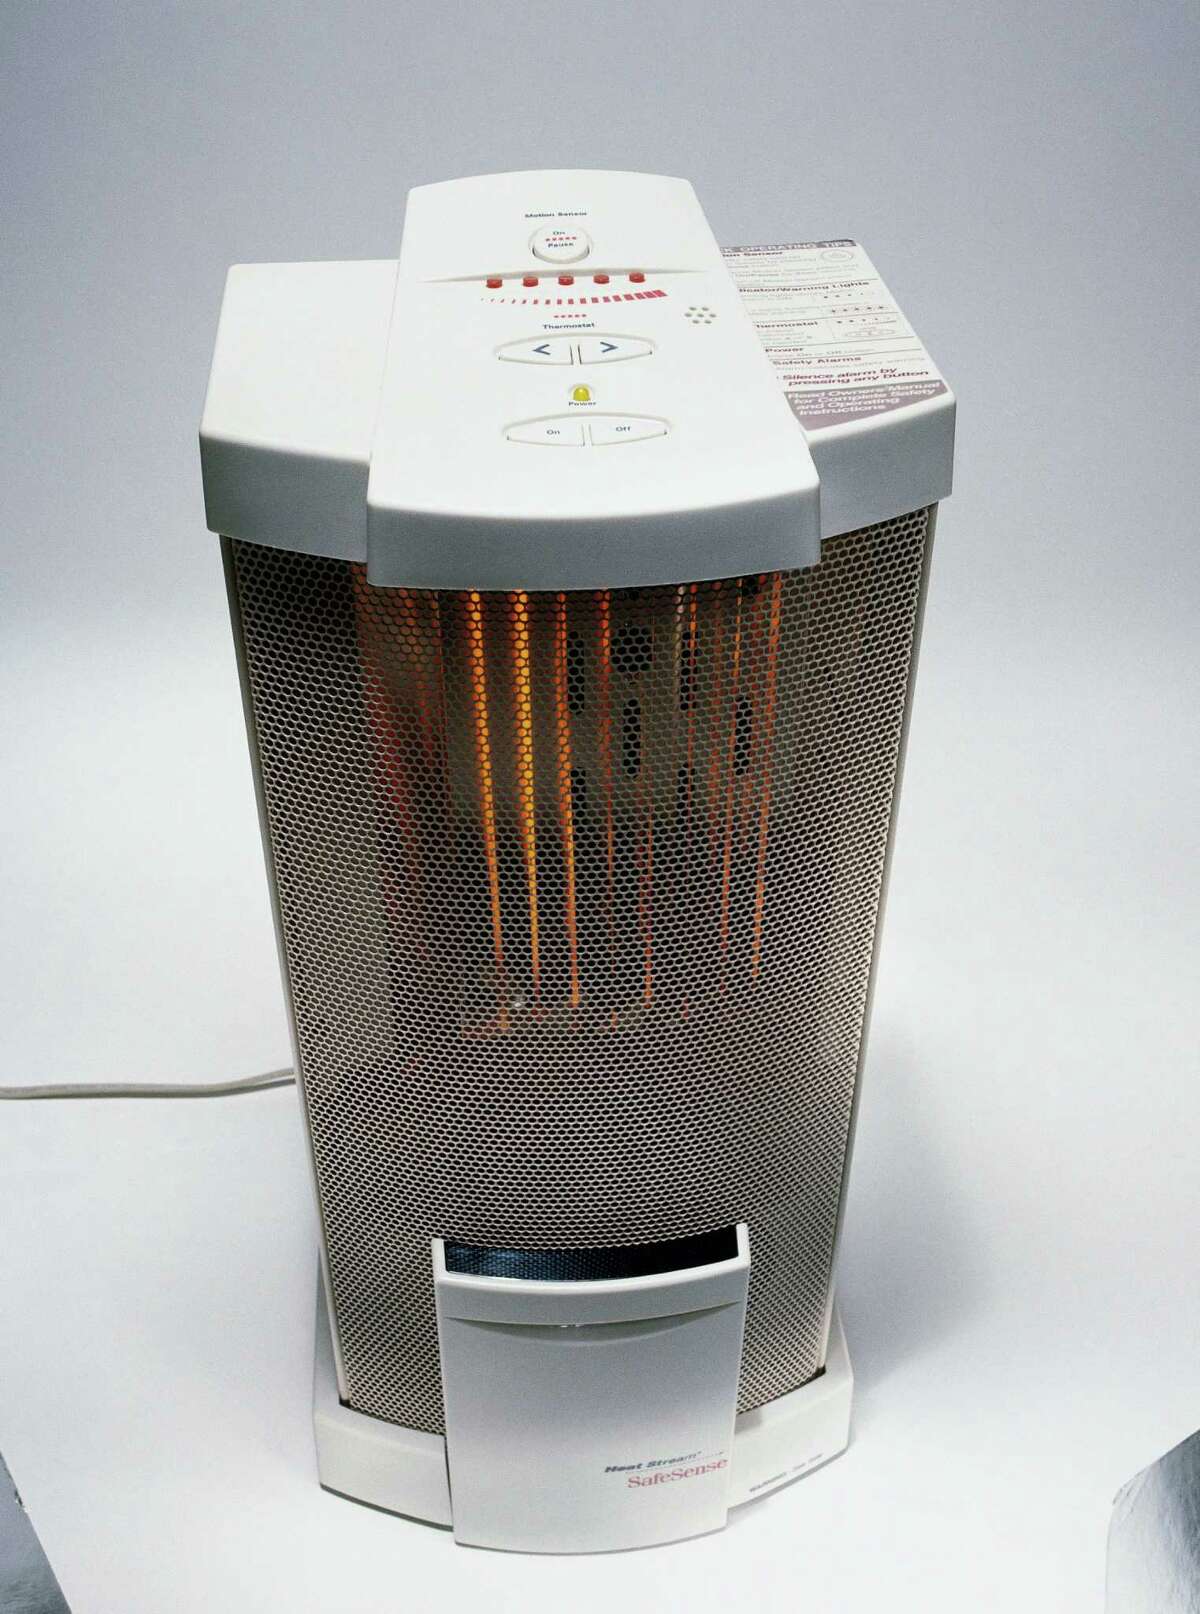 What's Leading Portable Heater You Can Buy?